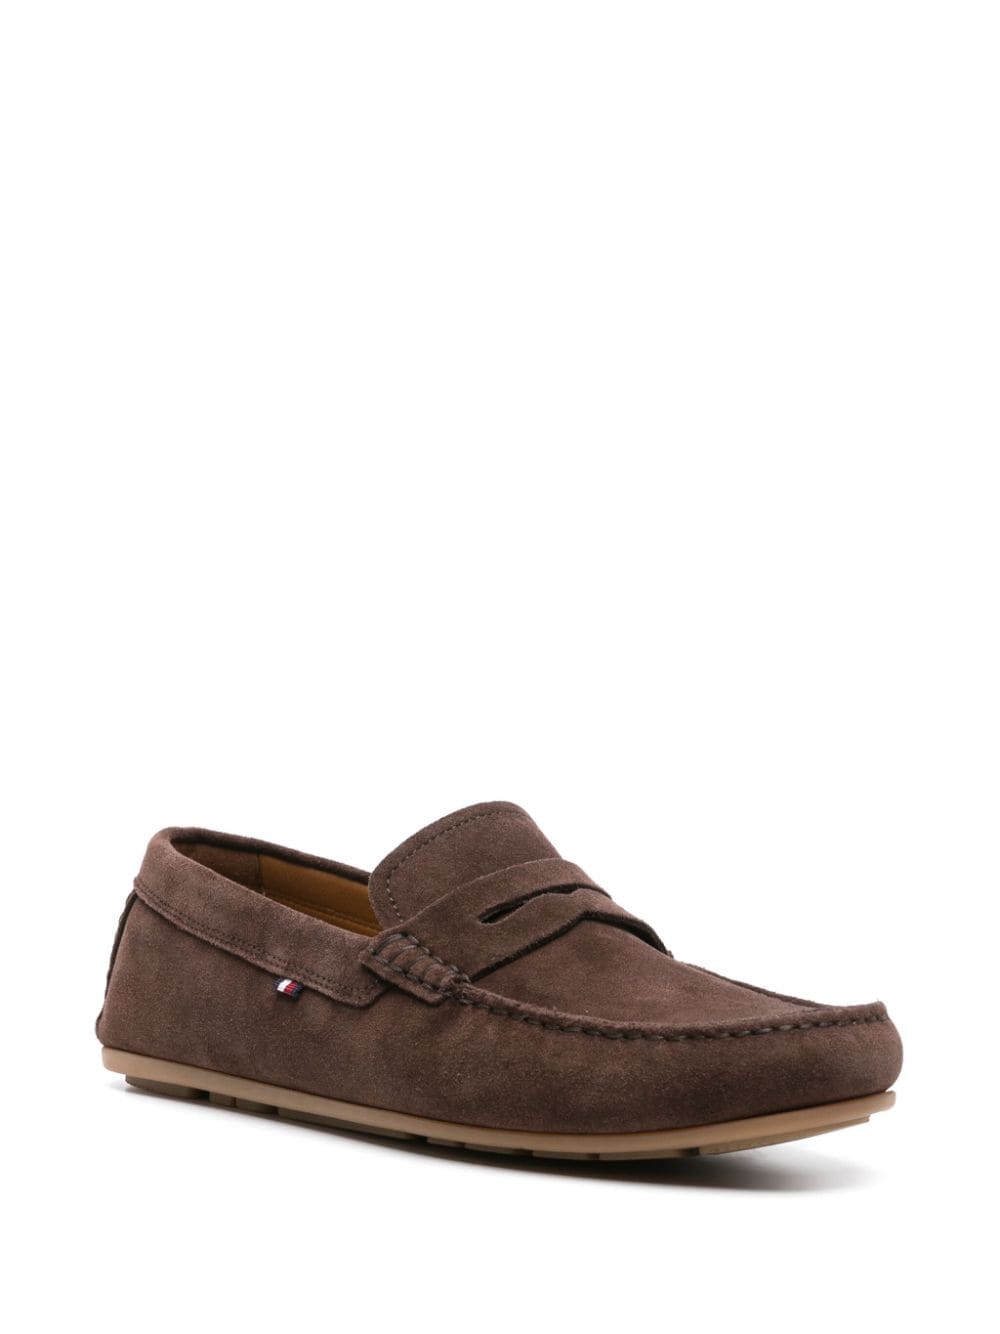 Image 2 of Tommy Hilfiger suede penny loafers